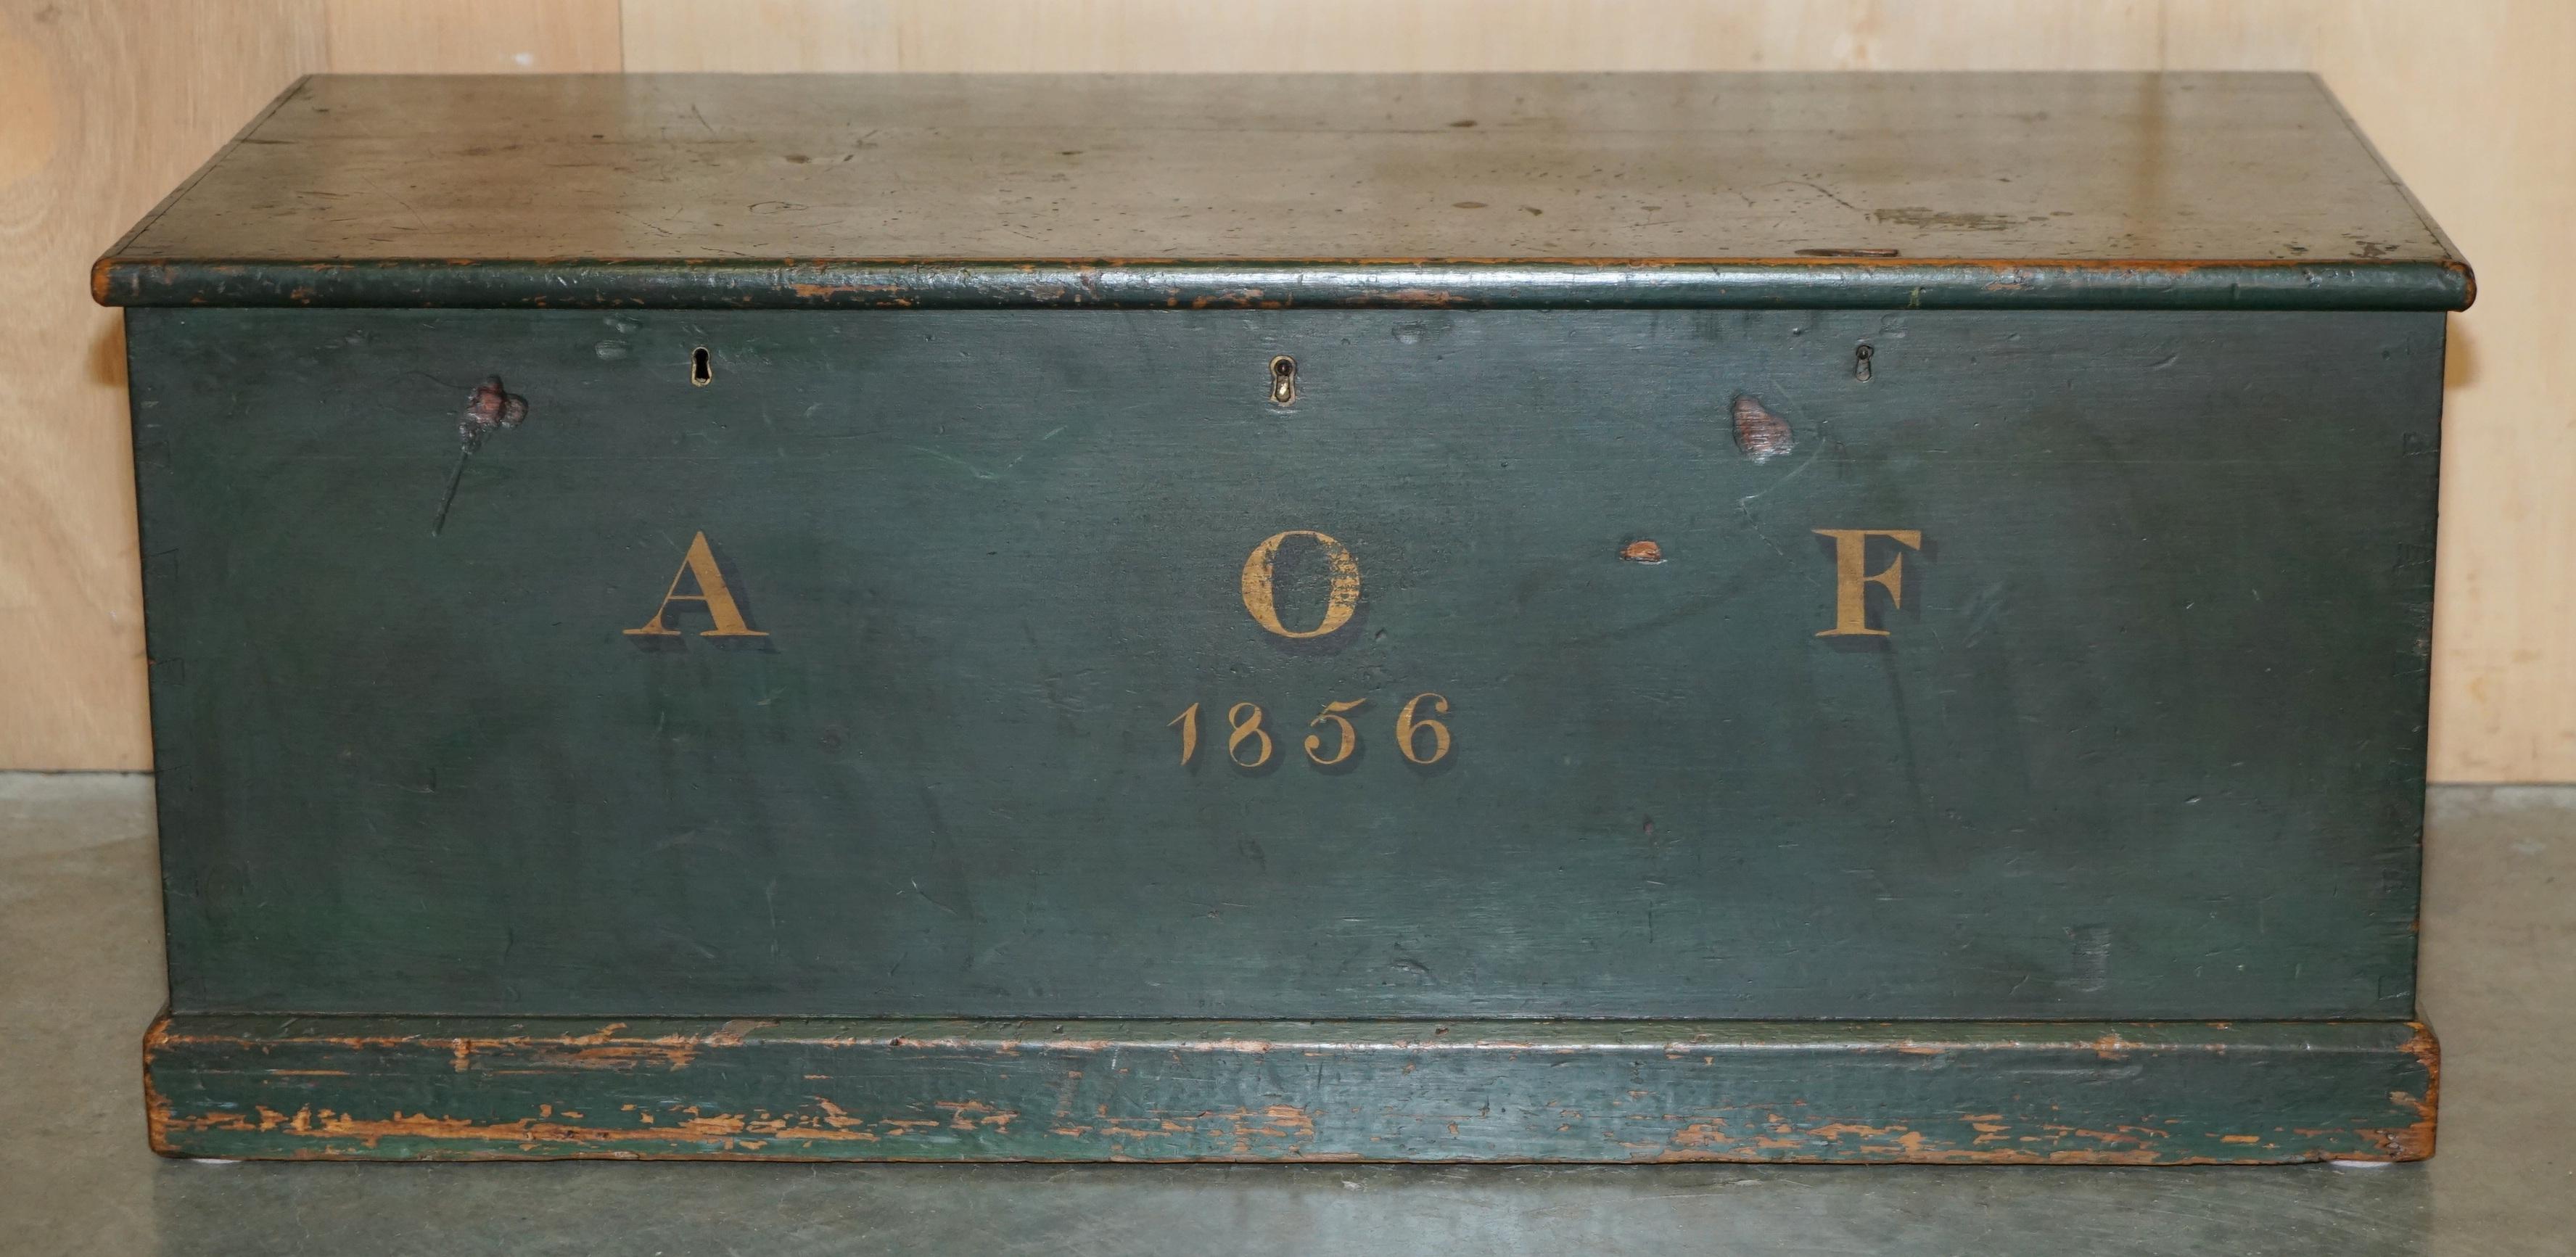 Royal House Antiques

Royal House Antiques is delighted to offer for sale this original circa 1856 dated Austrian Pine, original paint, trunk or chest that can be used as a coffee table 

Please note the delivery fee listed is just a guide, it